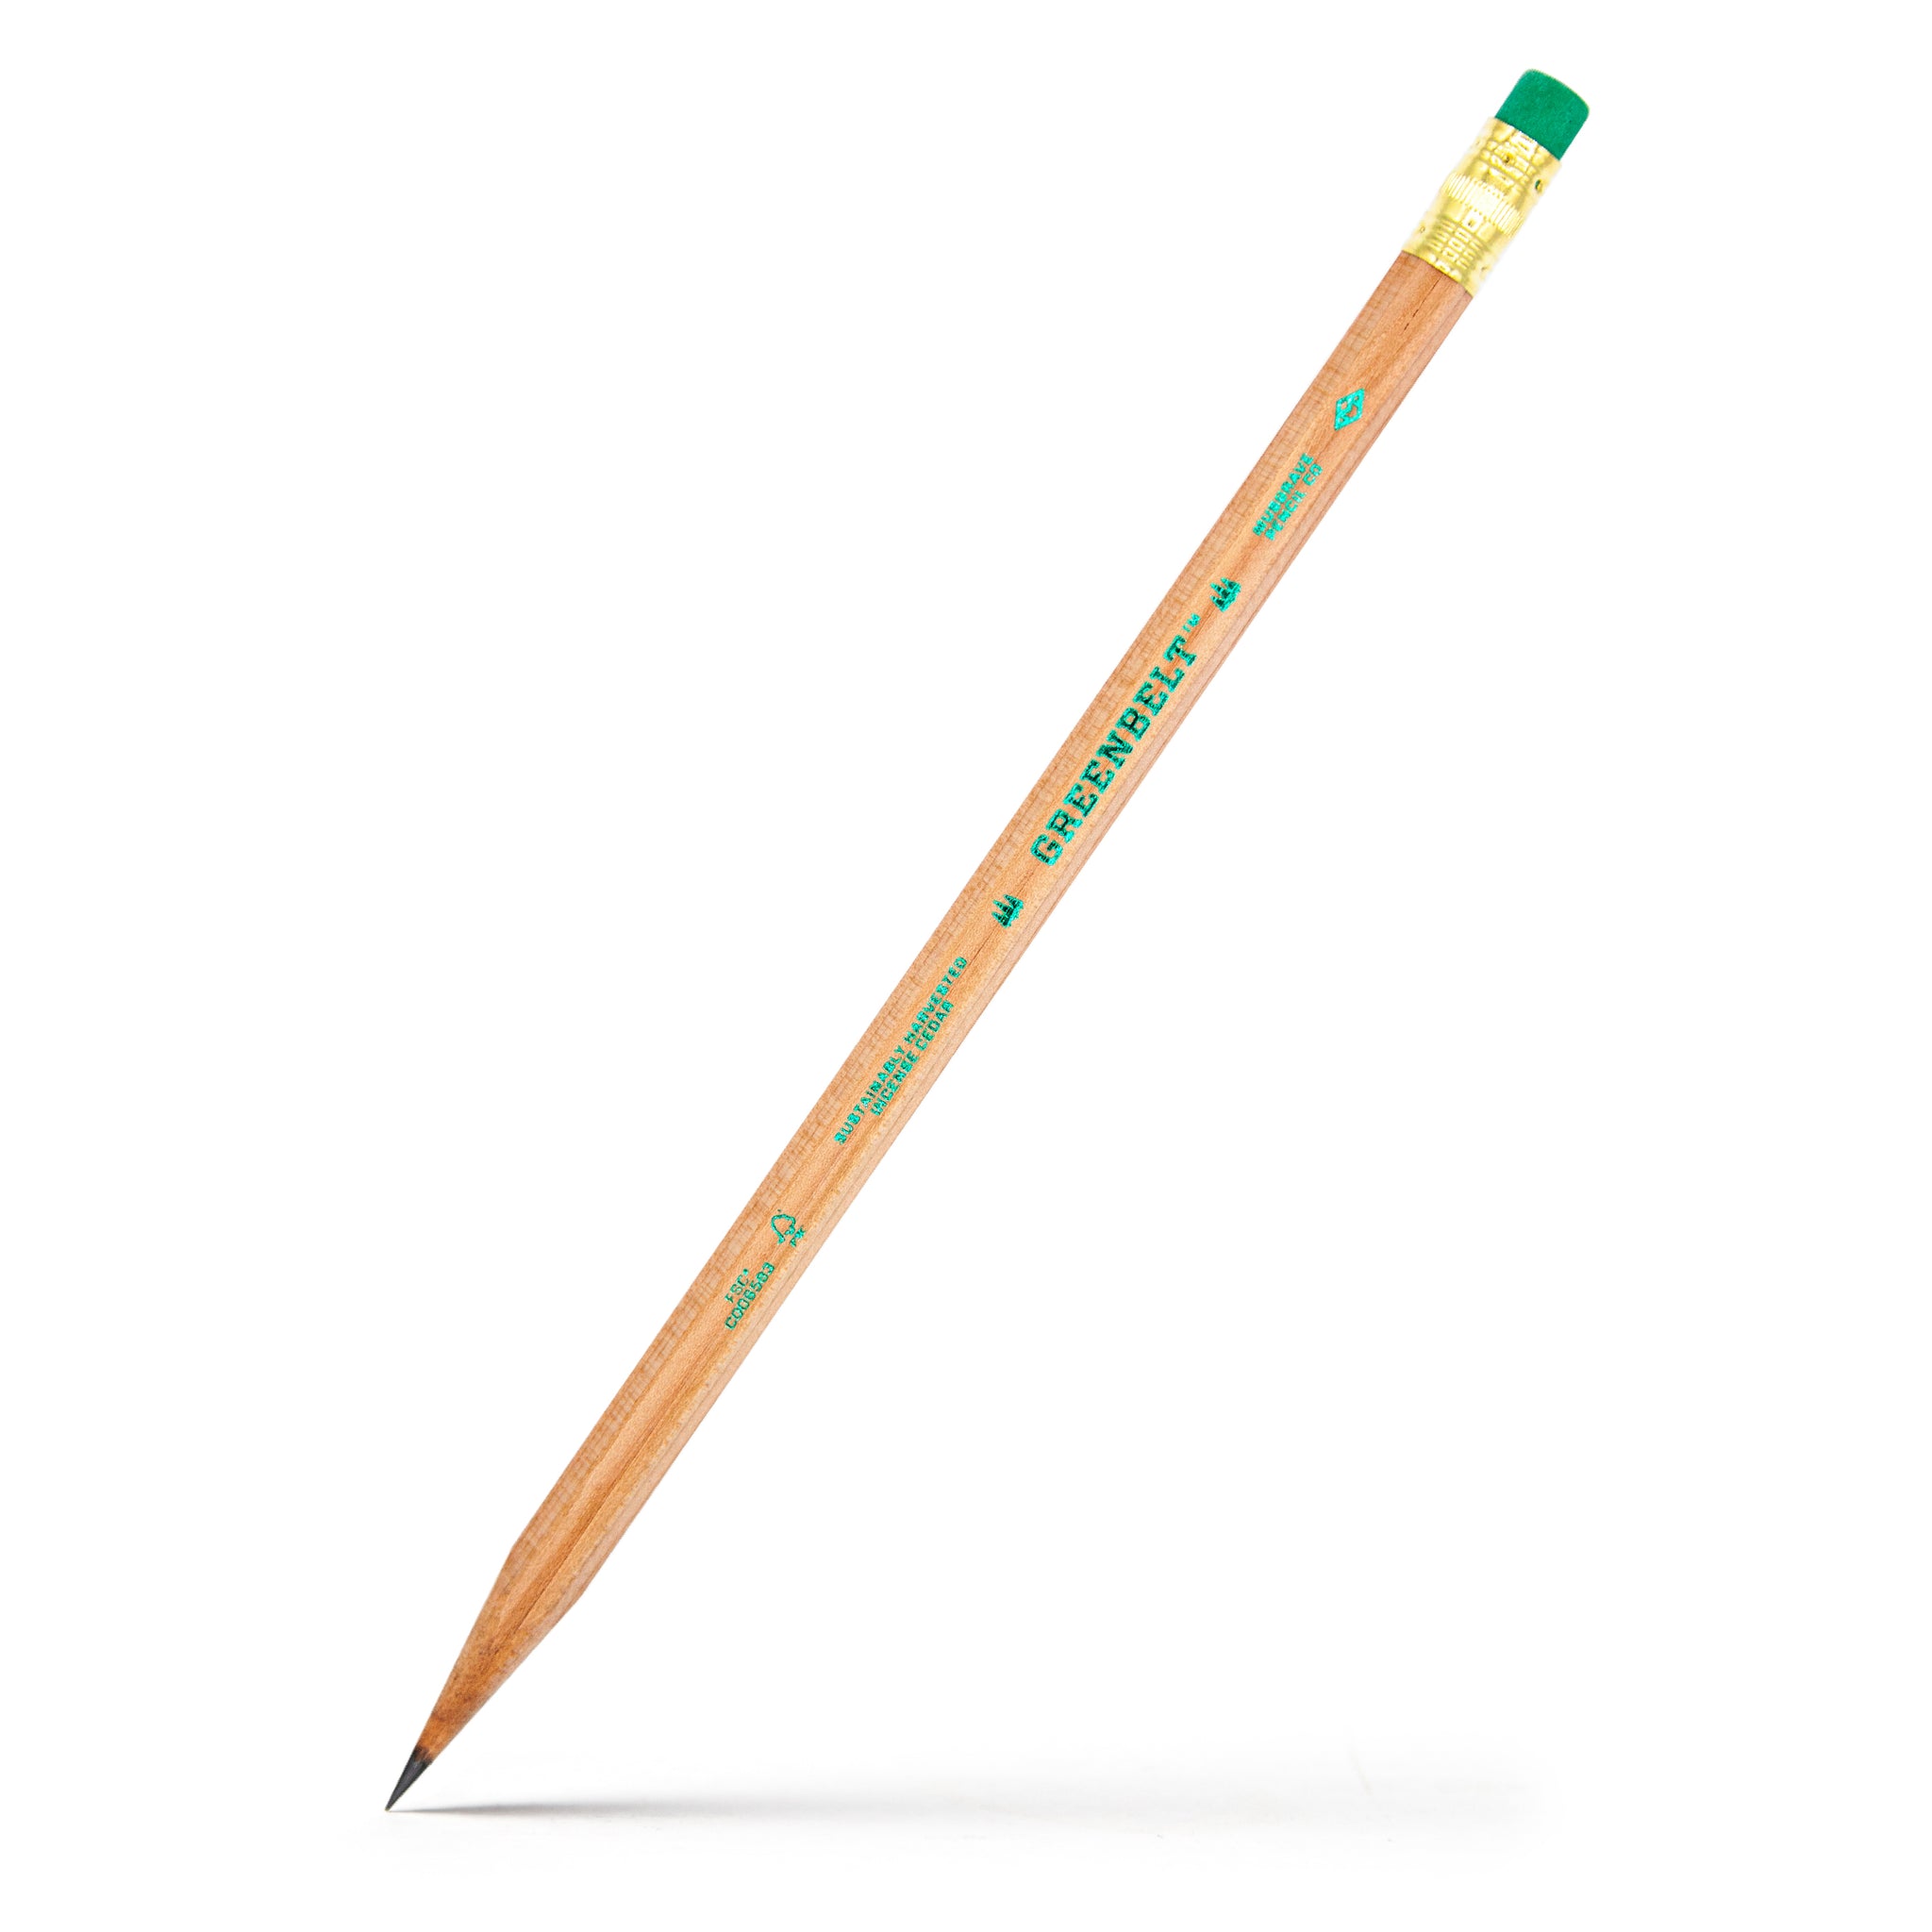 12-pack Greenbelt, Musgrave Pencil Company